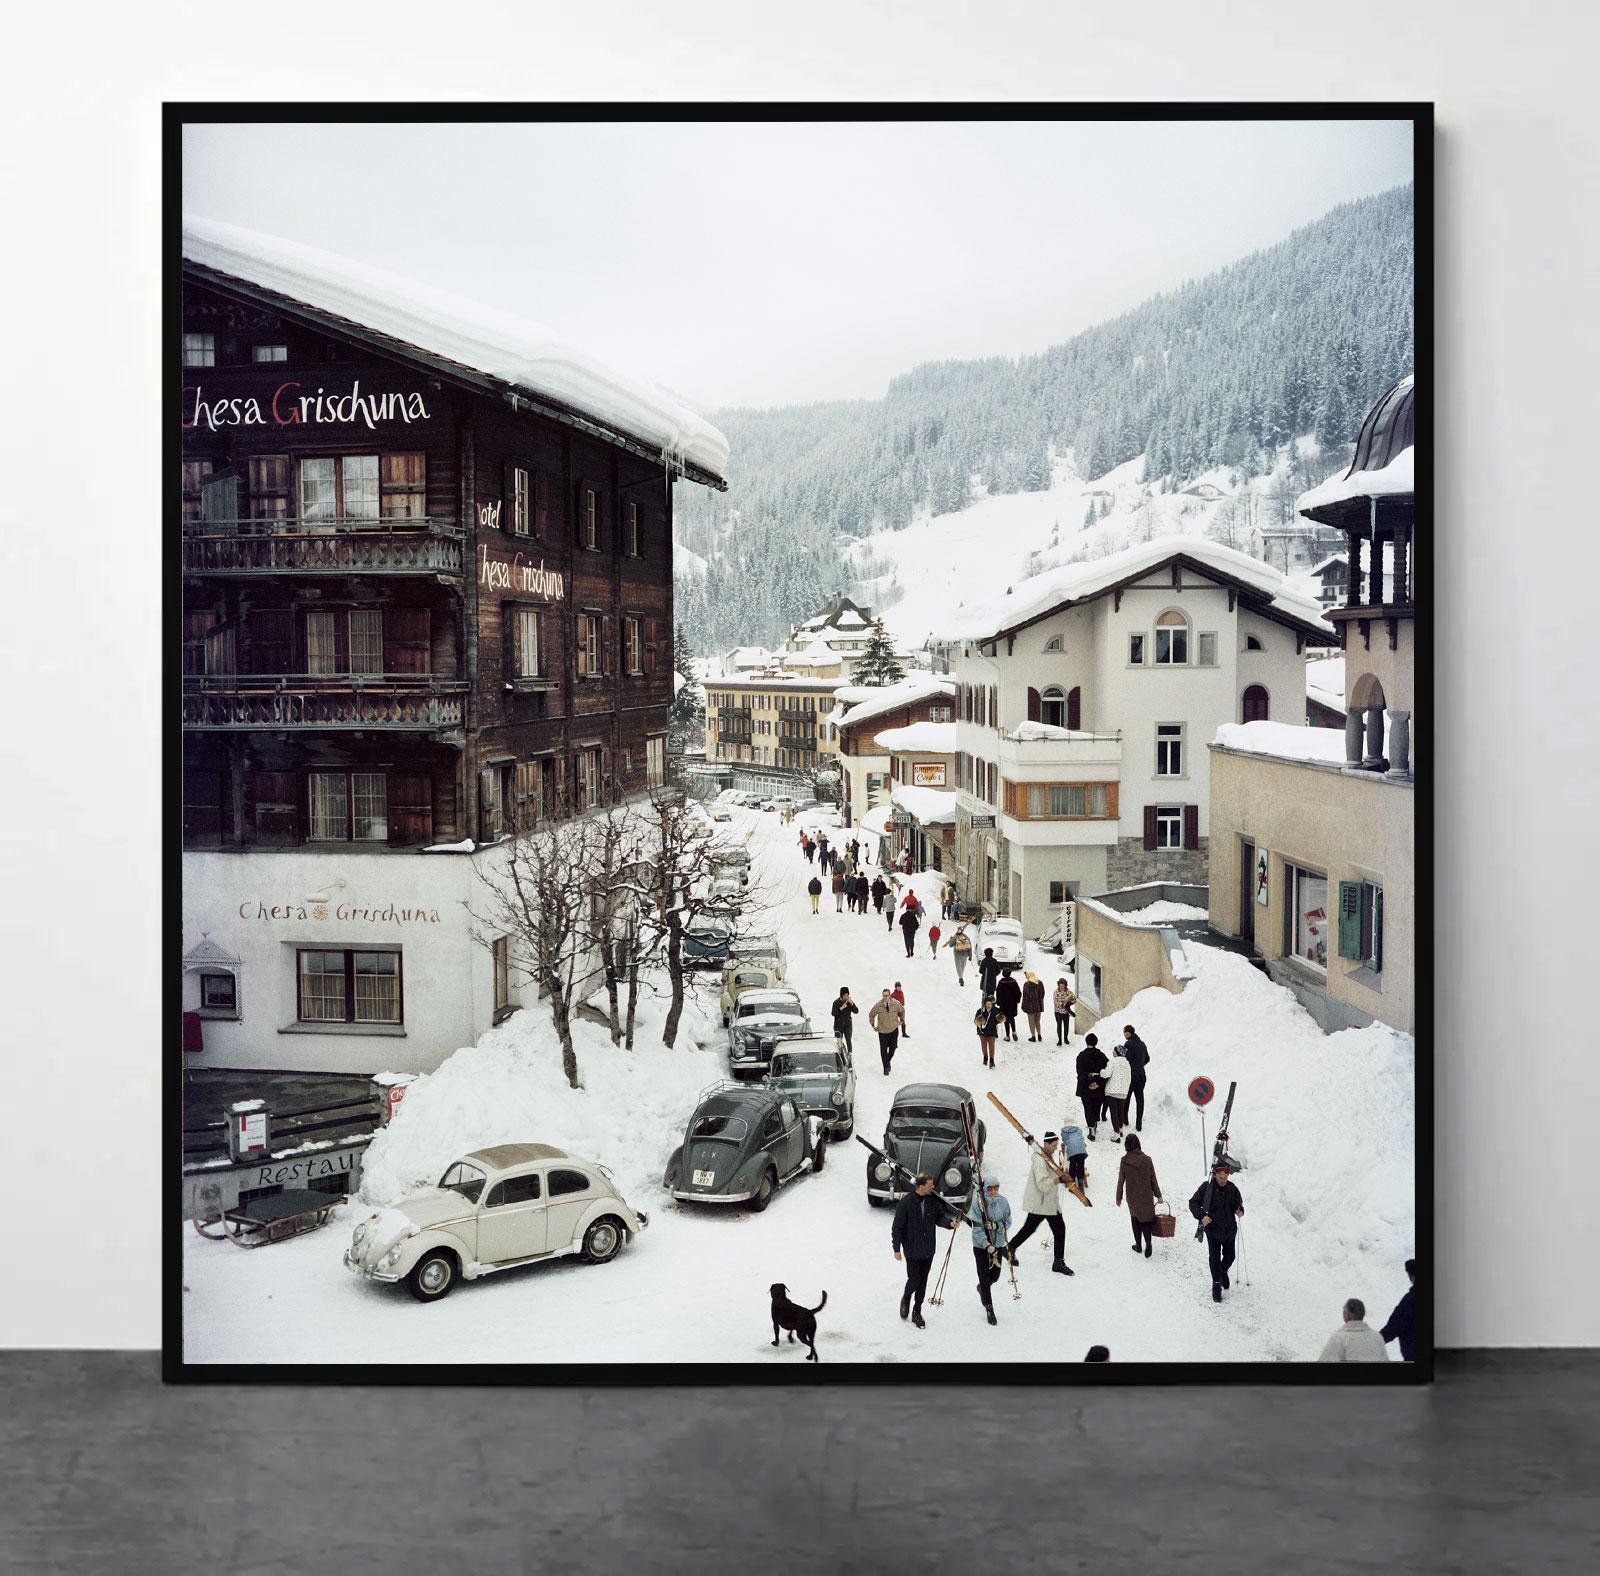 Slim Aarons
Kloisters
1963 (printed later)
C print
Estate stamped and numbered edition of 150 
with Certificate of authenticity
Caption: Skiers pass by the Hotel Chesa Grischuna in Klosters, 1963. (Photo by Slim Aarons/Hulton Archive/Getty